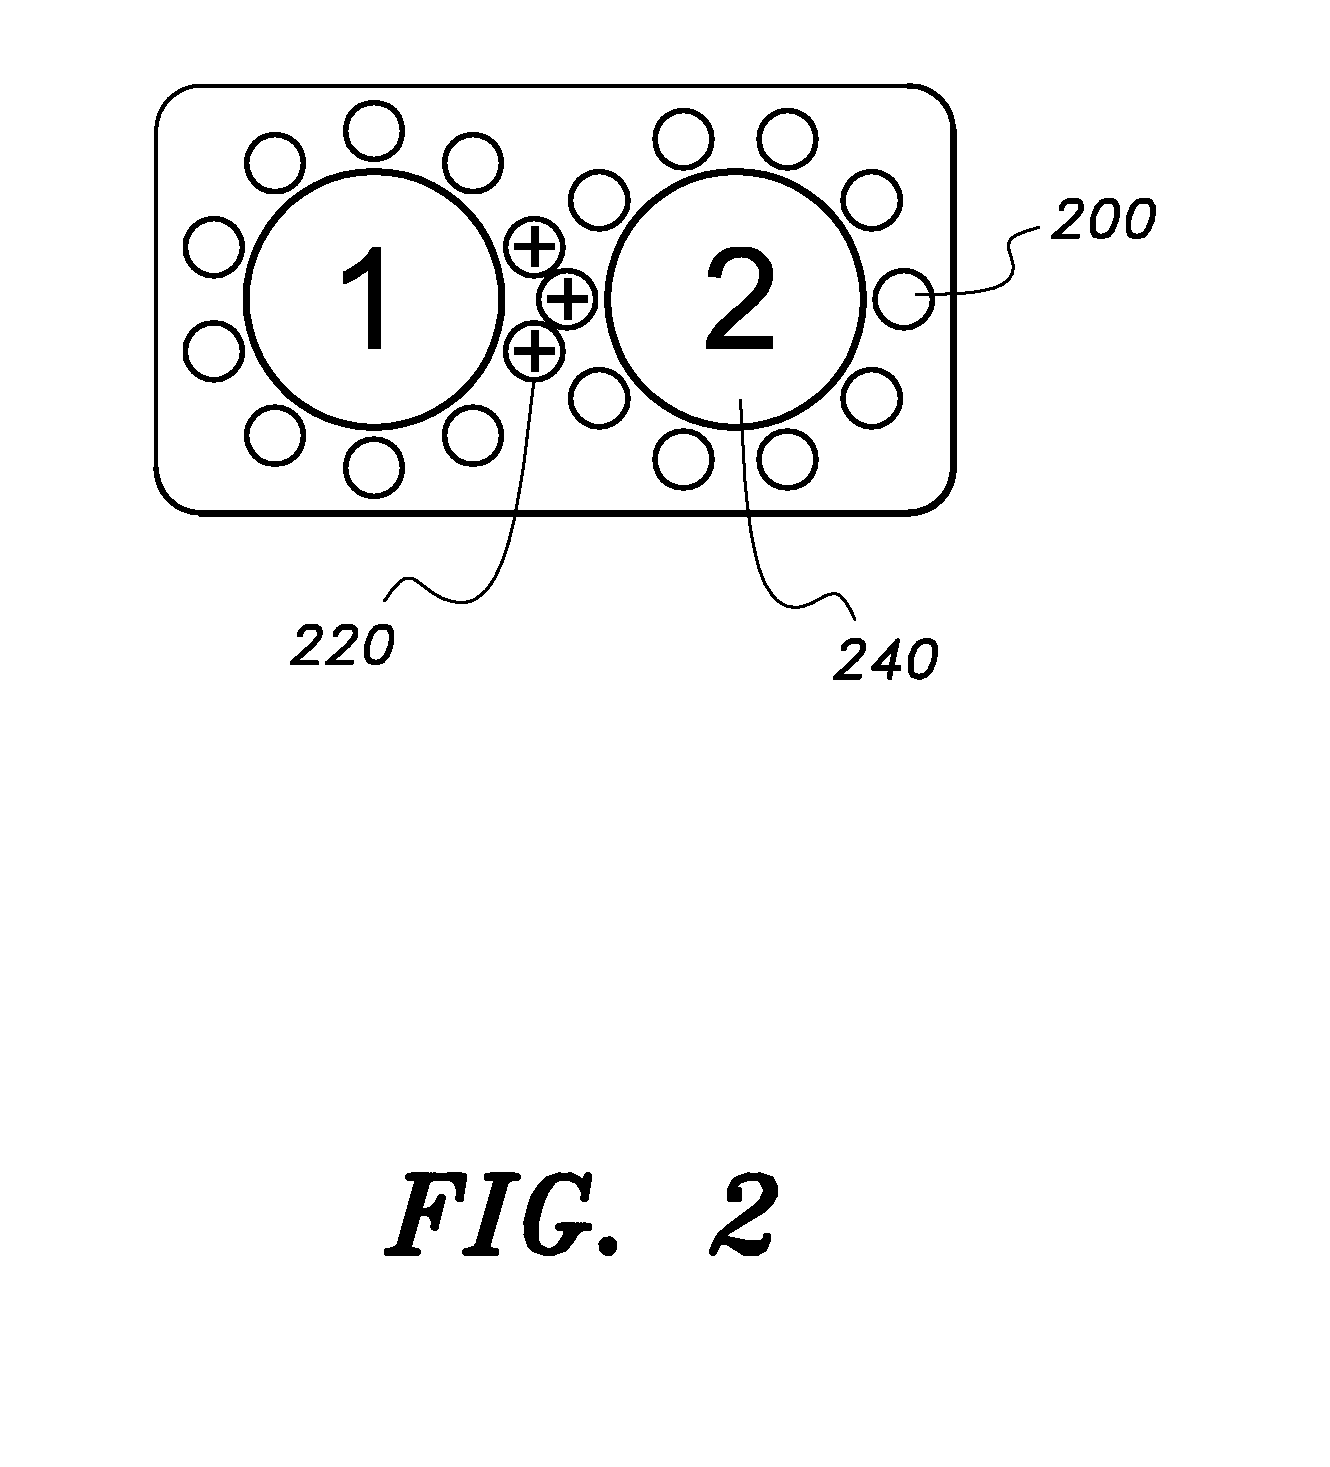 Therapeutic Treatment Device with EMG Biofeedback